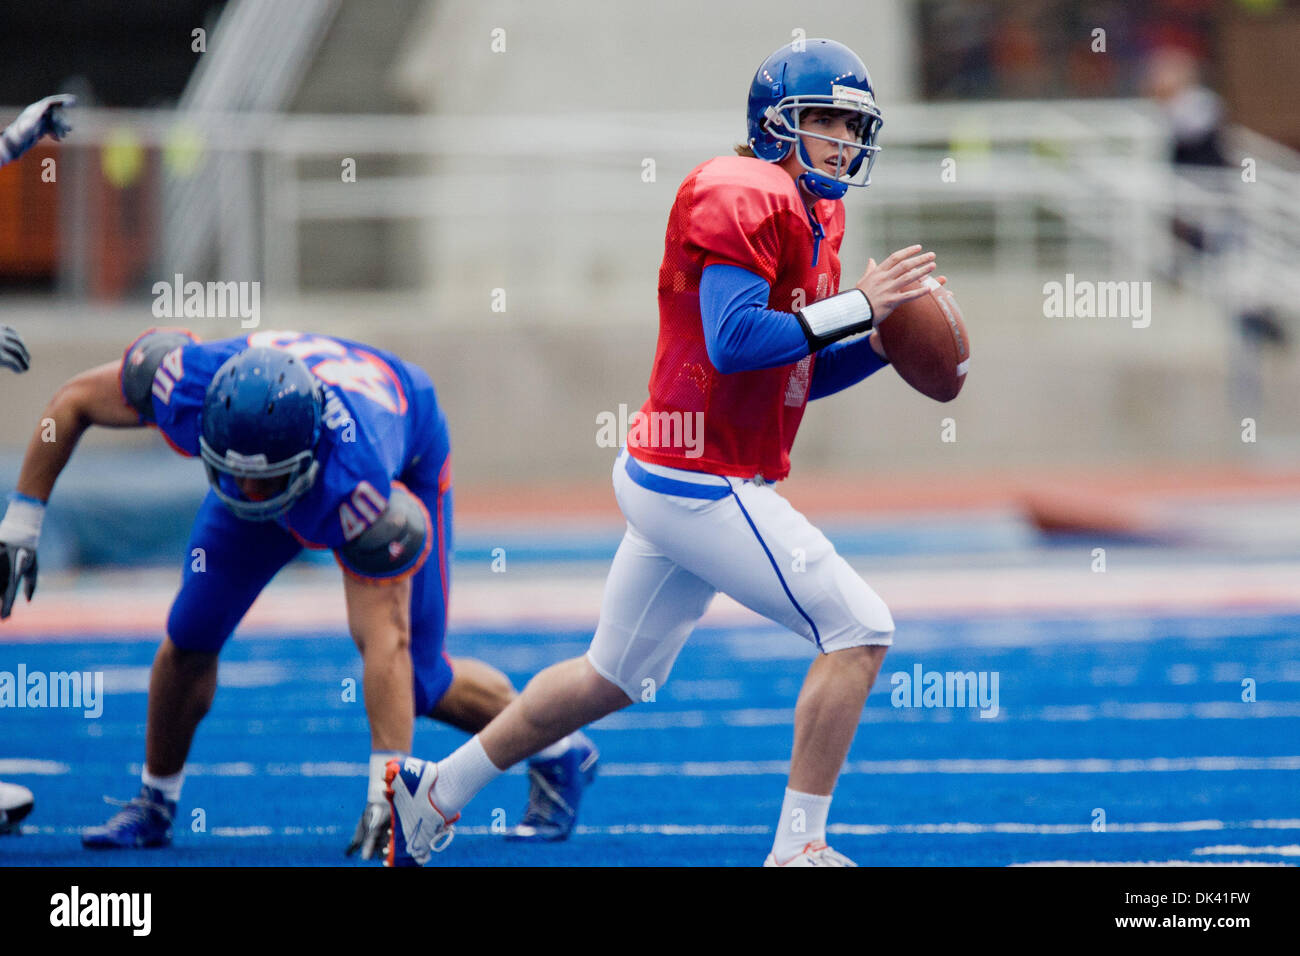 Mar. 16, 2011 - Boise, Idaho, U.S - Boise State Broncos QB Kellen Moore (11) rolls out to pass during the annual Boise State Blue and Orange spring game in Bronco Stadium. (Credit Image: © Stanley Brewster/Southcreek Global/ZUMAPRESS.com) Stock Photo